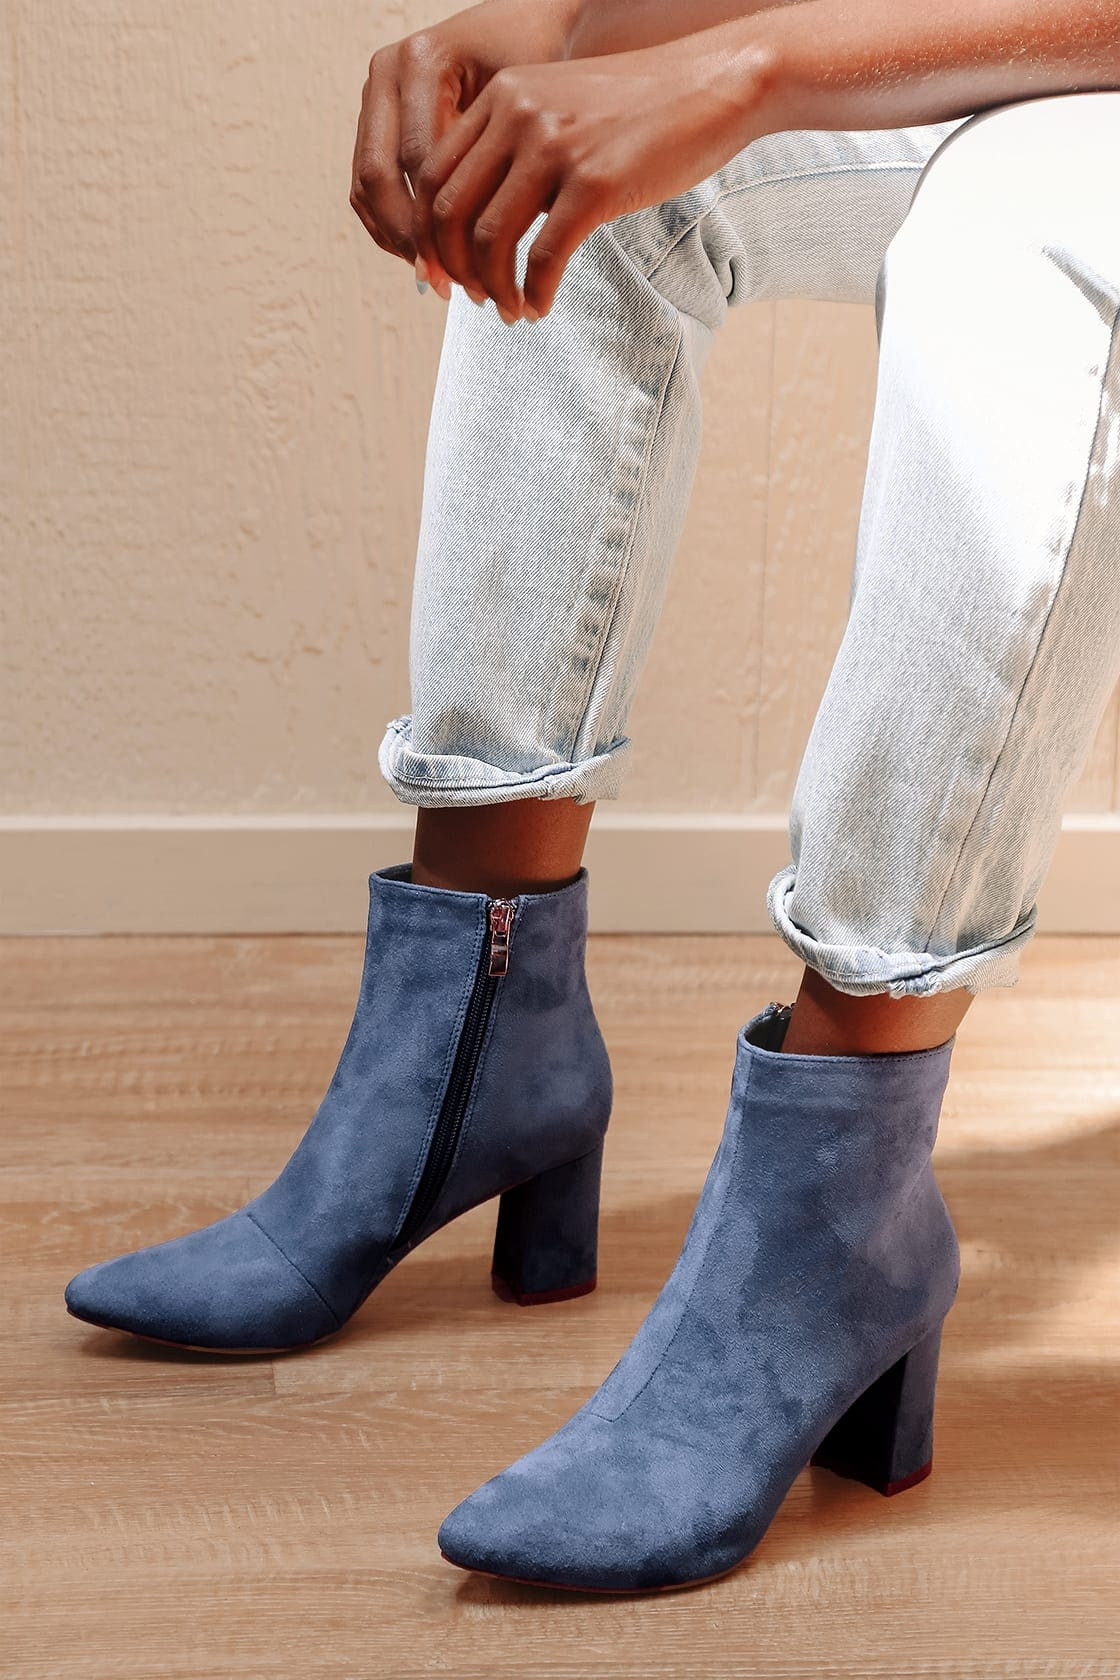 11.-Blue-Suede-Boots.jpeg